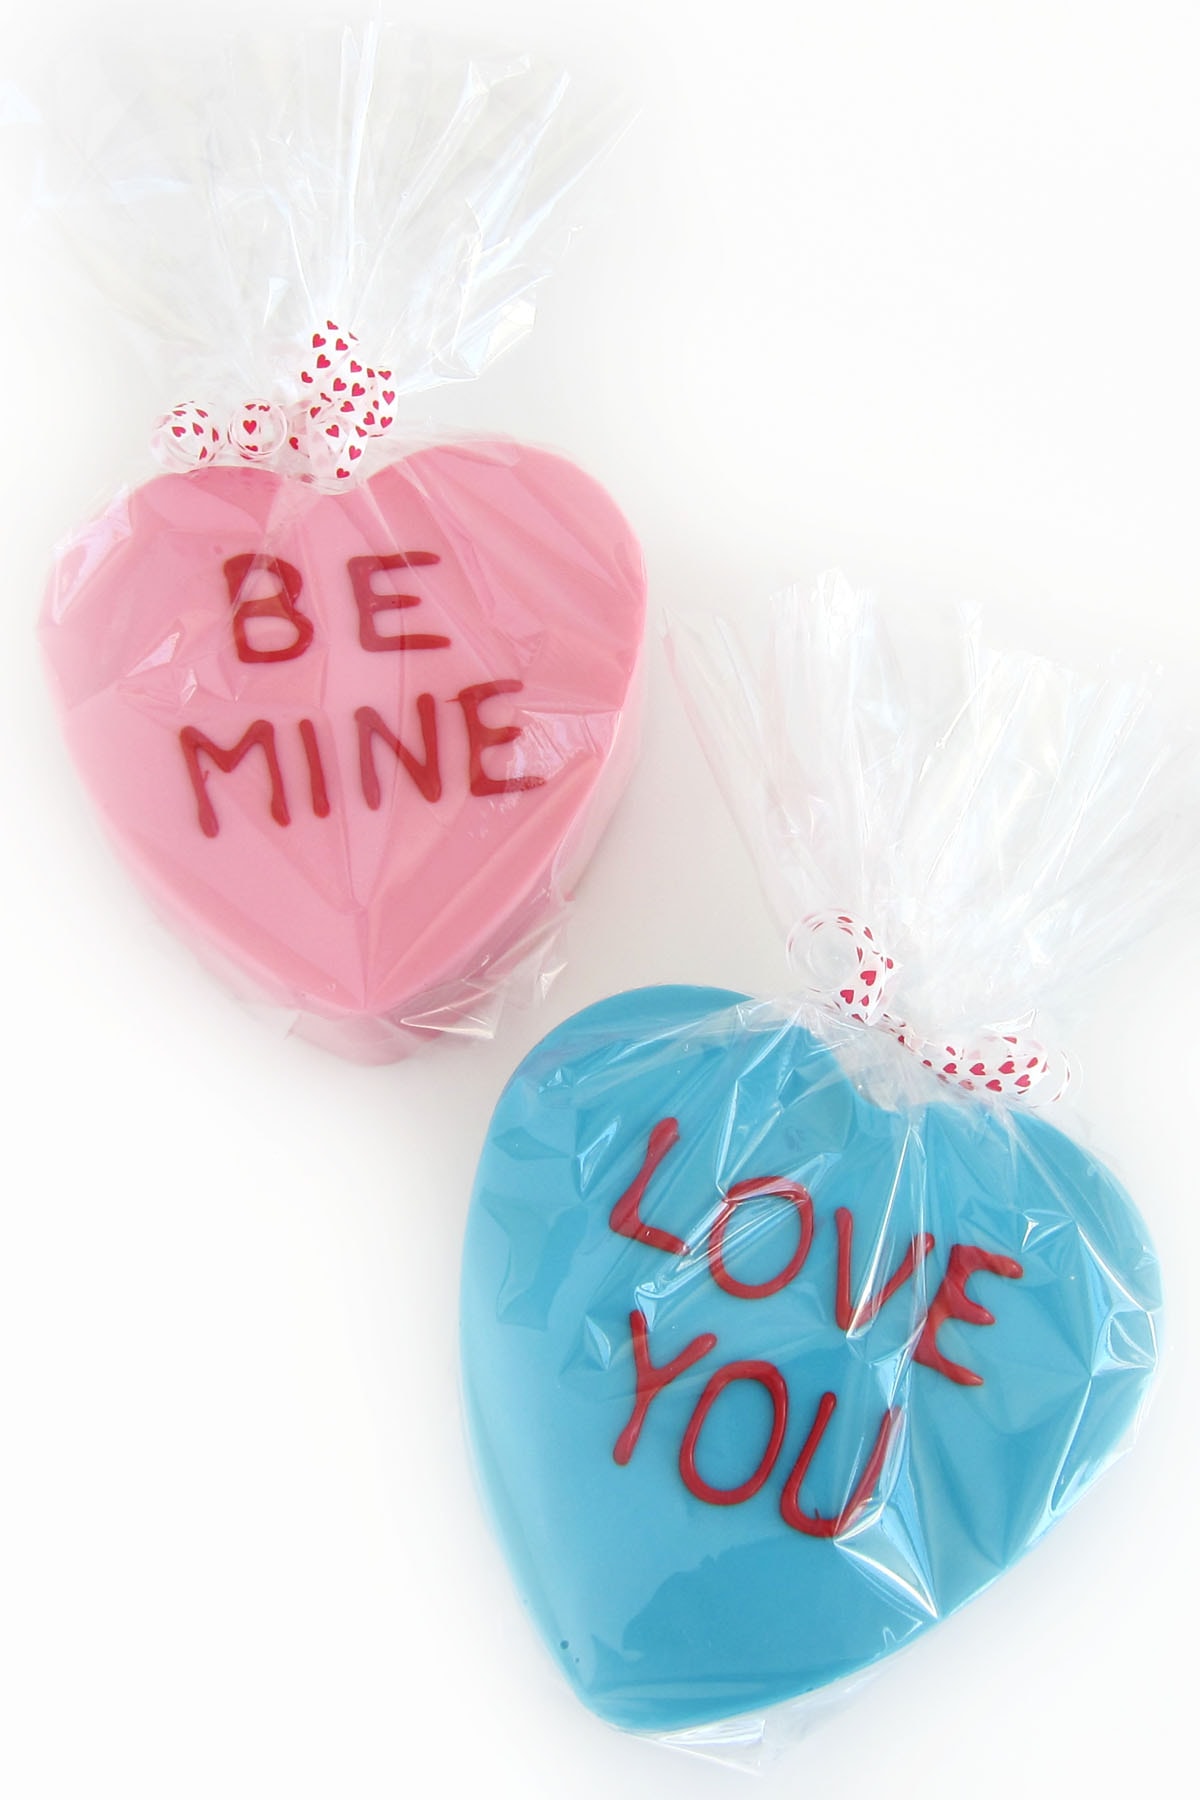 white chocolate breakable conversation hearts wrapped in clear cellophane tied with red heart ribbons